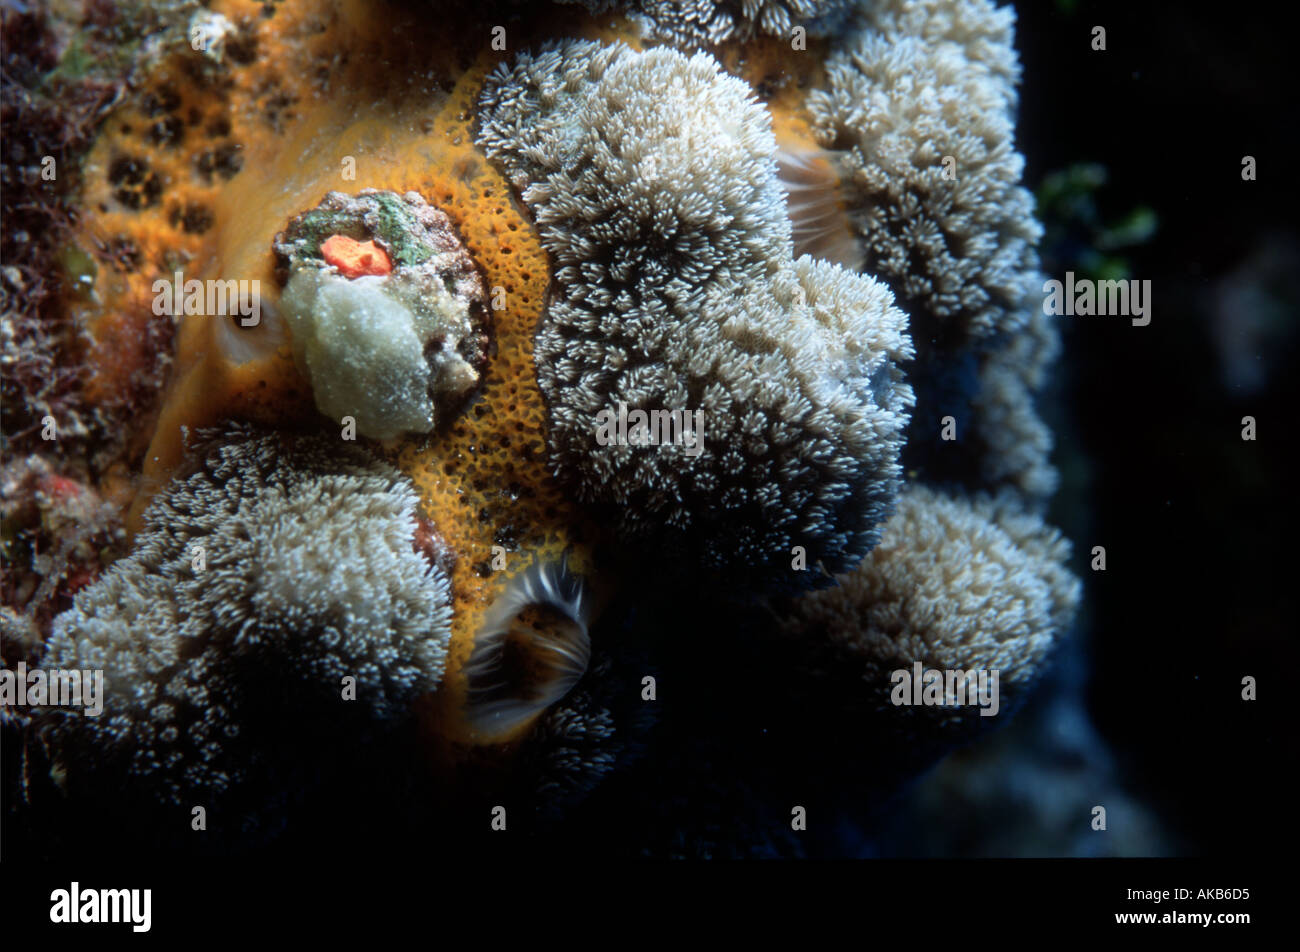 The blooming corallites of this stony coral show an equal grace and delicacy as other inhabitants of underwater sea gardens Stock Photo